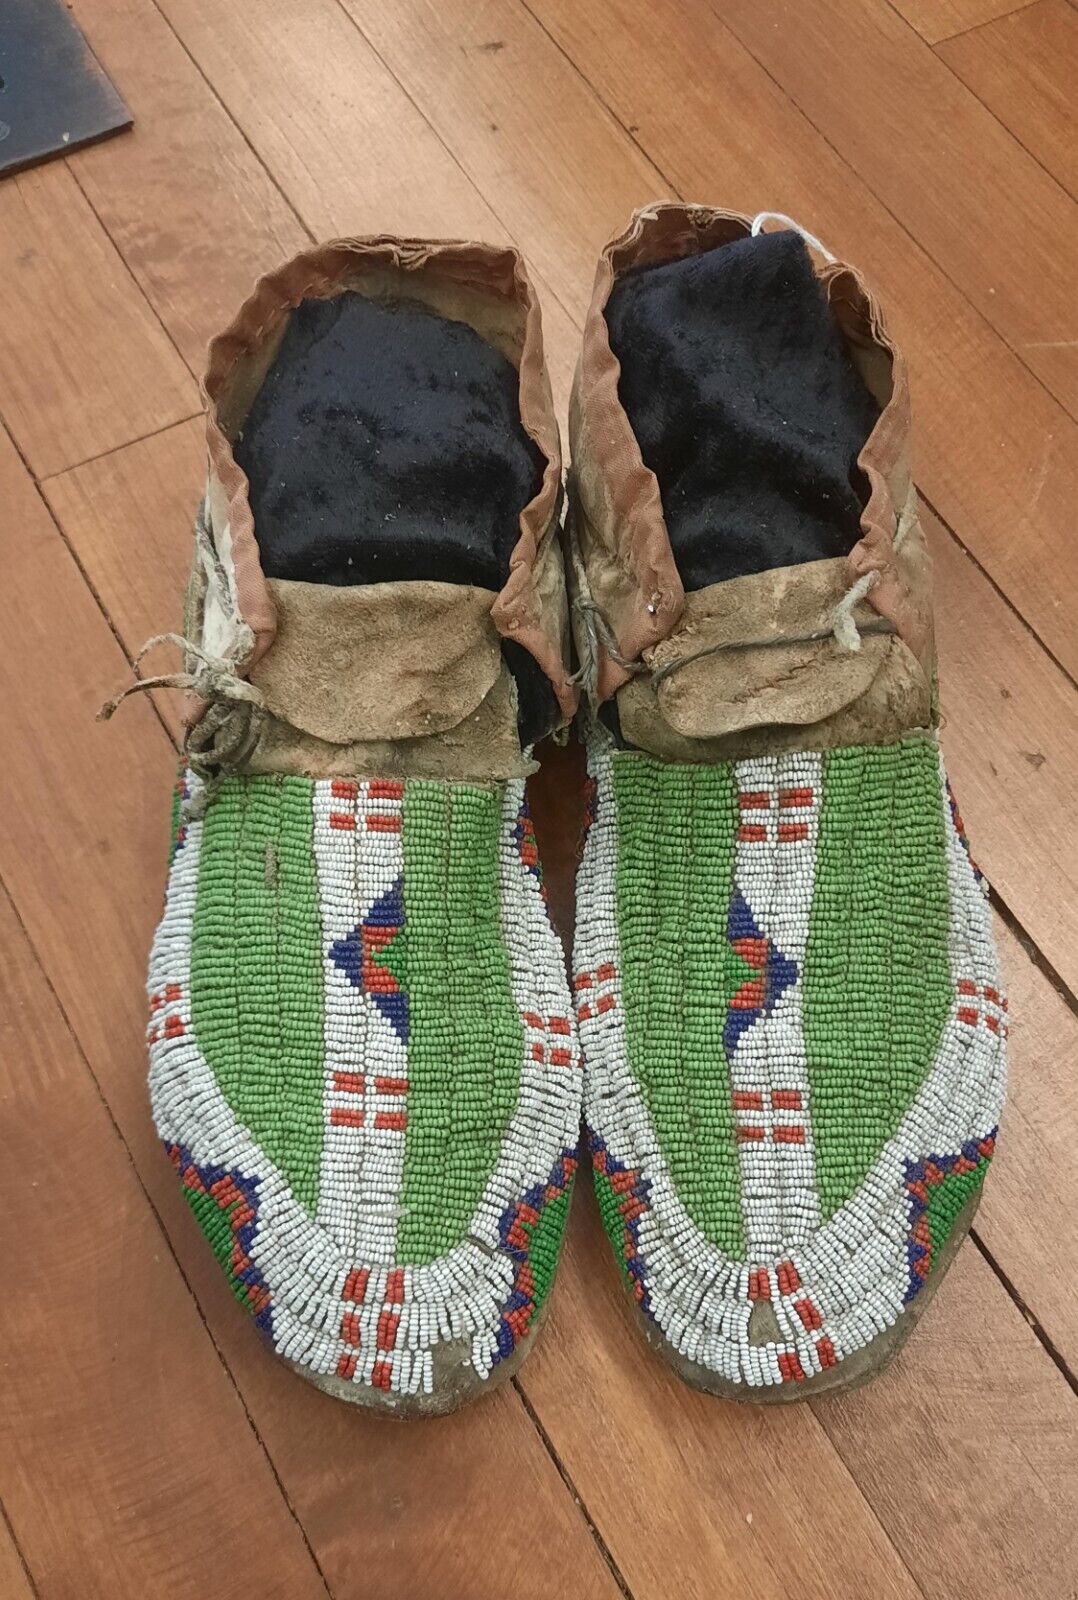 Antique Native American Beaded Sioux Moccasins c1900 Sinew Sewn Indian Made